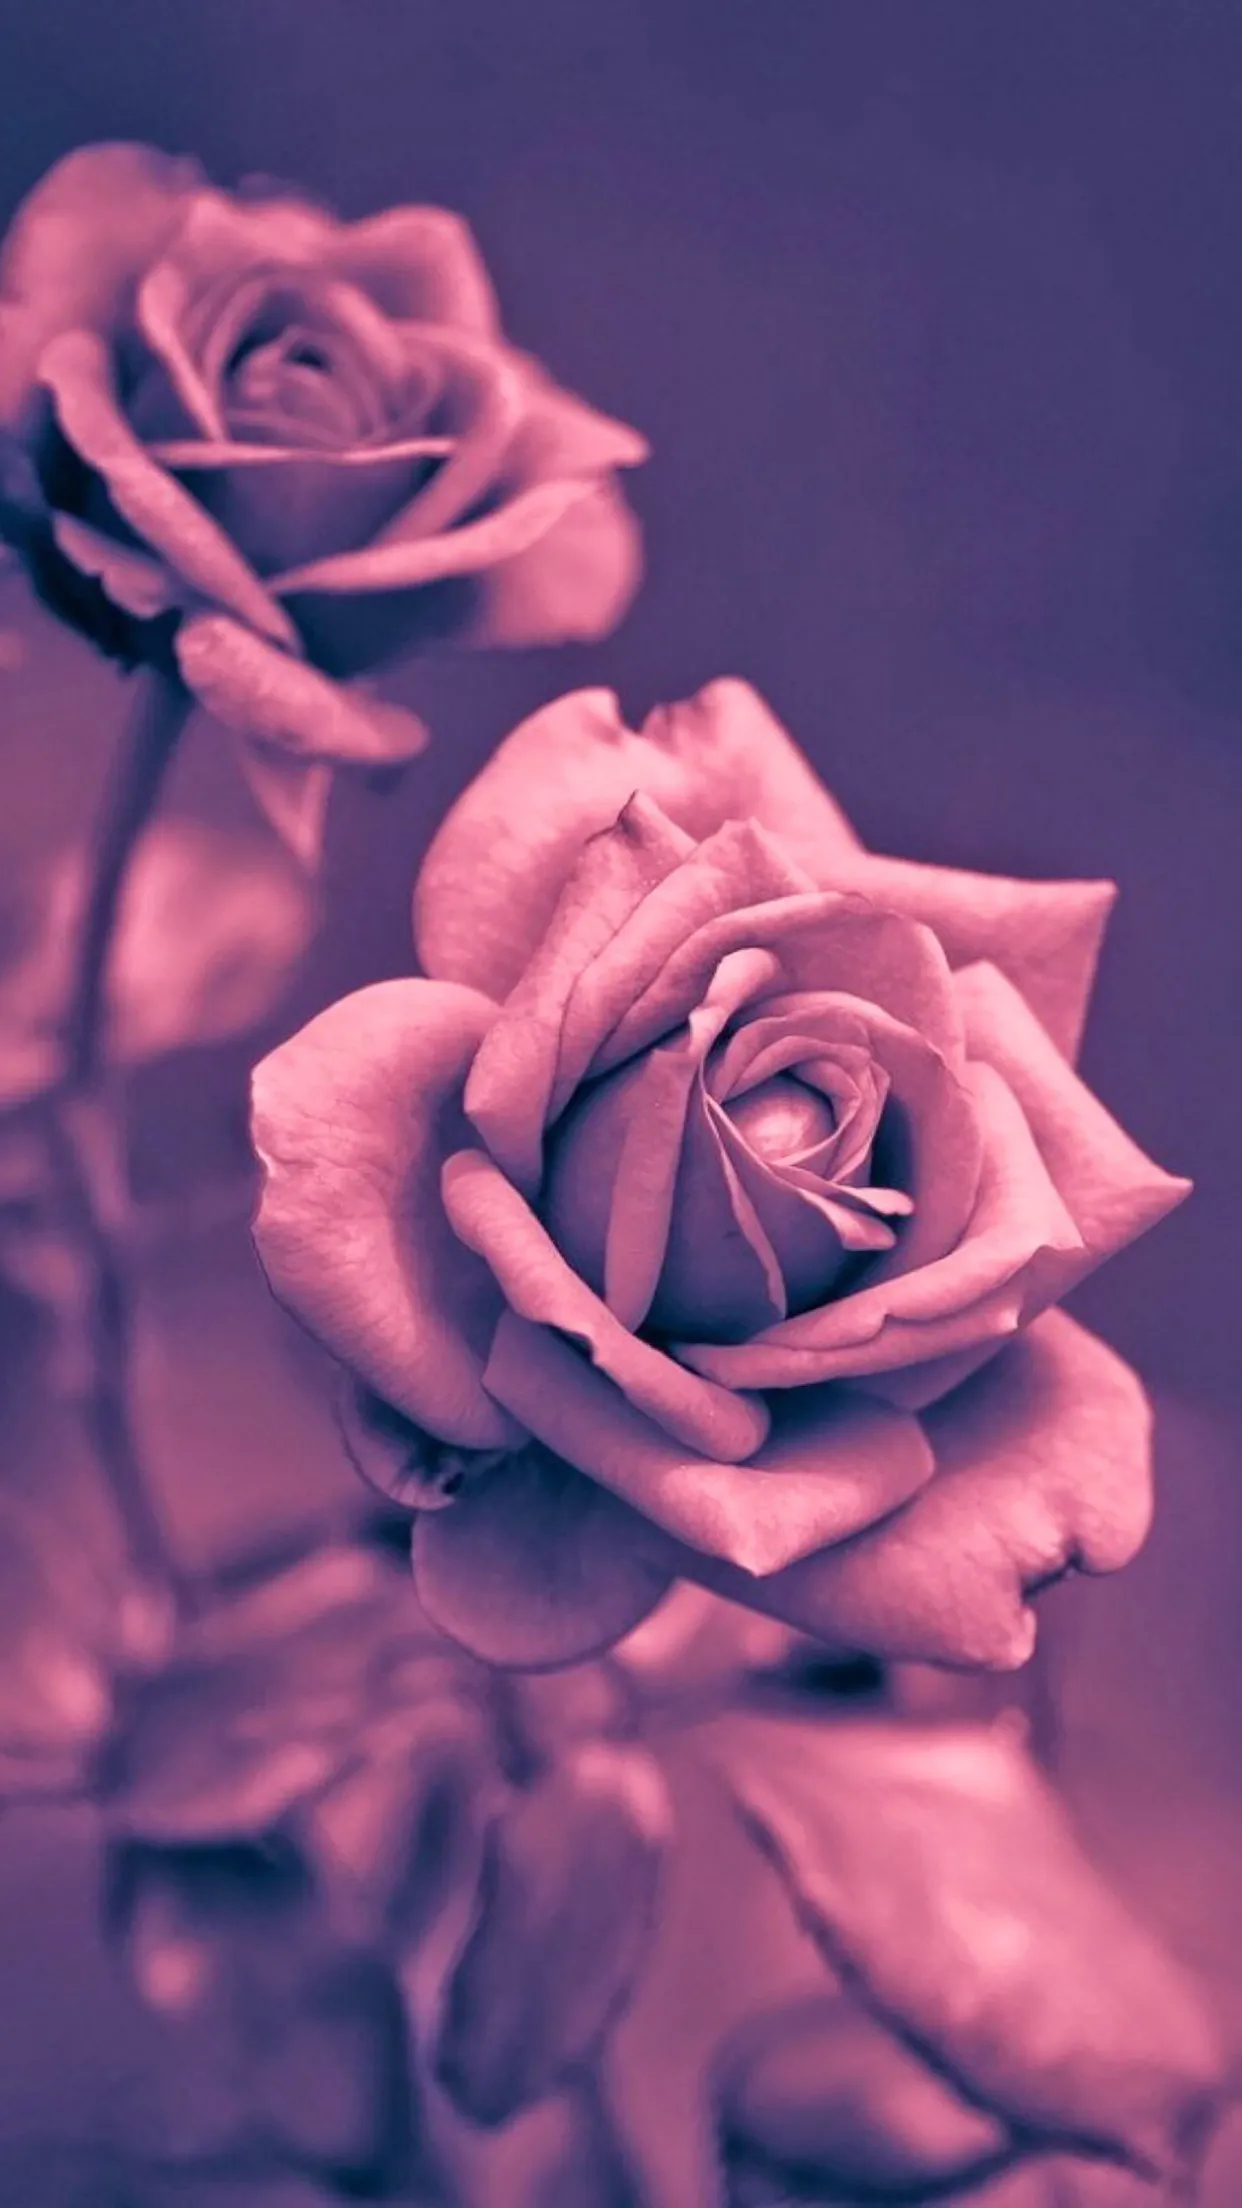 1242x2208 Roses pink rose closeup Wallpaper for iPhone 11, Pro Max, X, 8, 7, 6 Free Download on 3Wallpapers